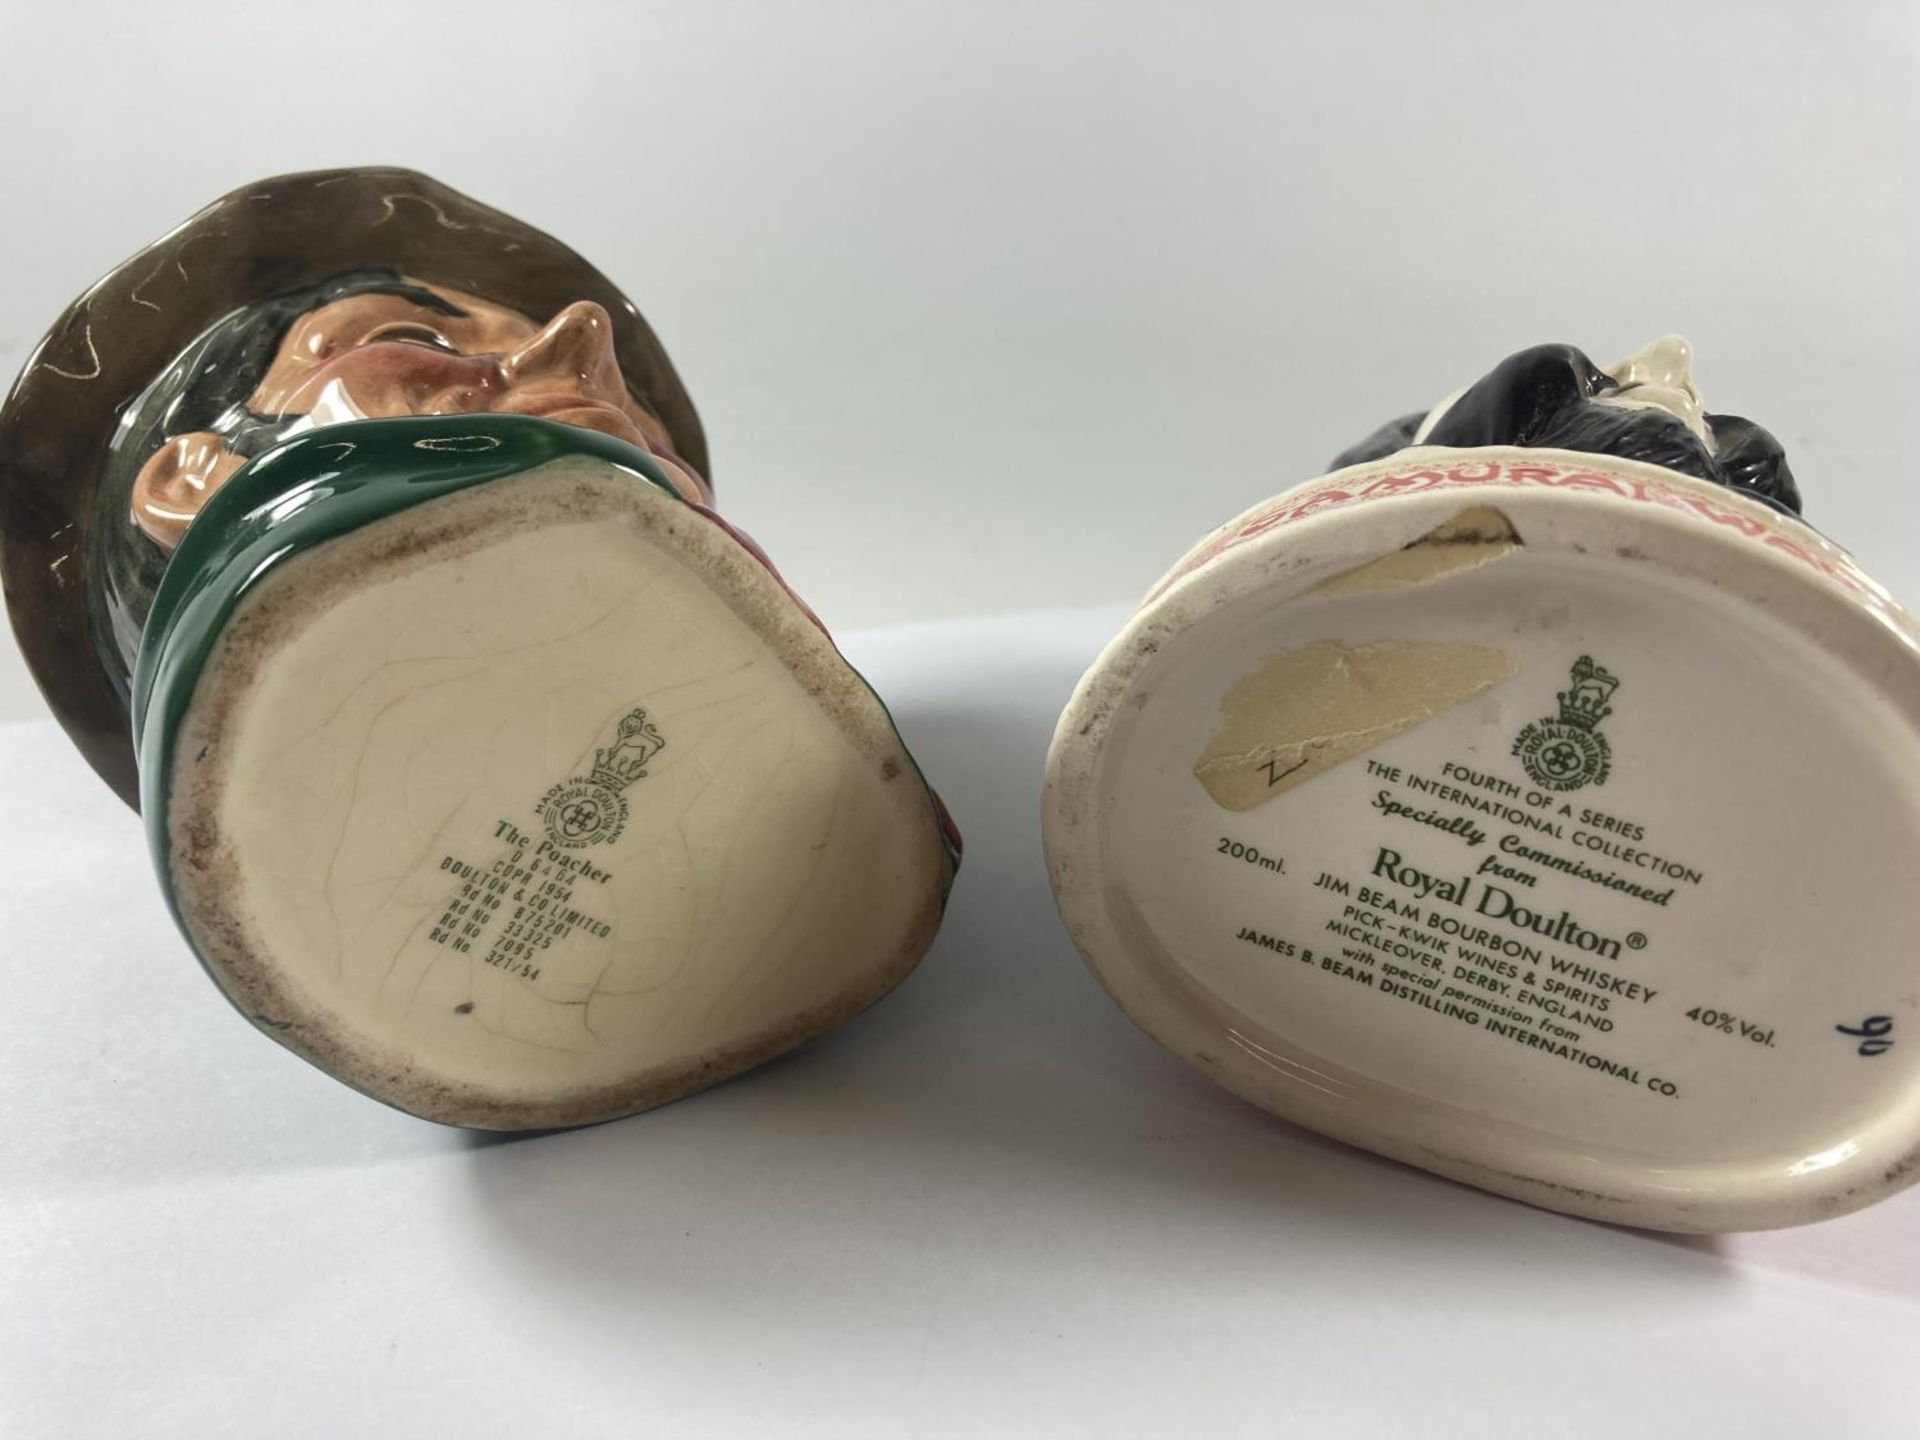 TWO ROYAL DOULTON WHISKY DECANTERS - Image 6 of 6